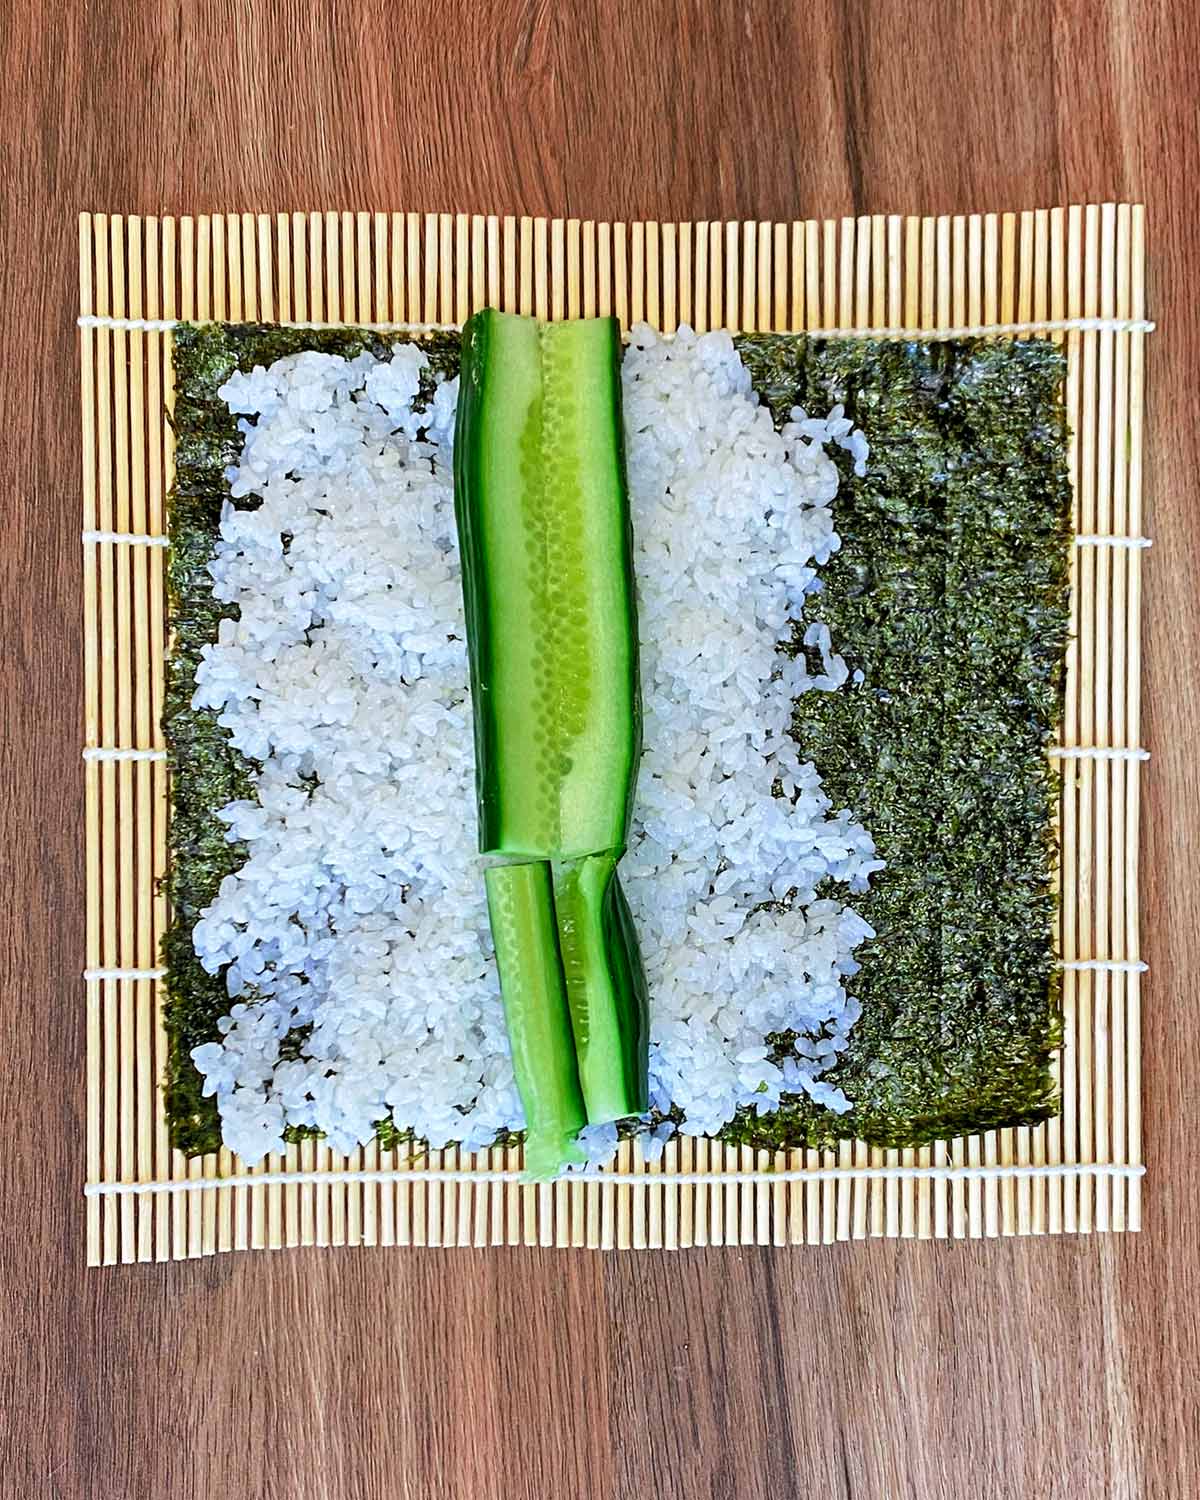 Strips of cucumber laid on top of the rice.